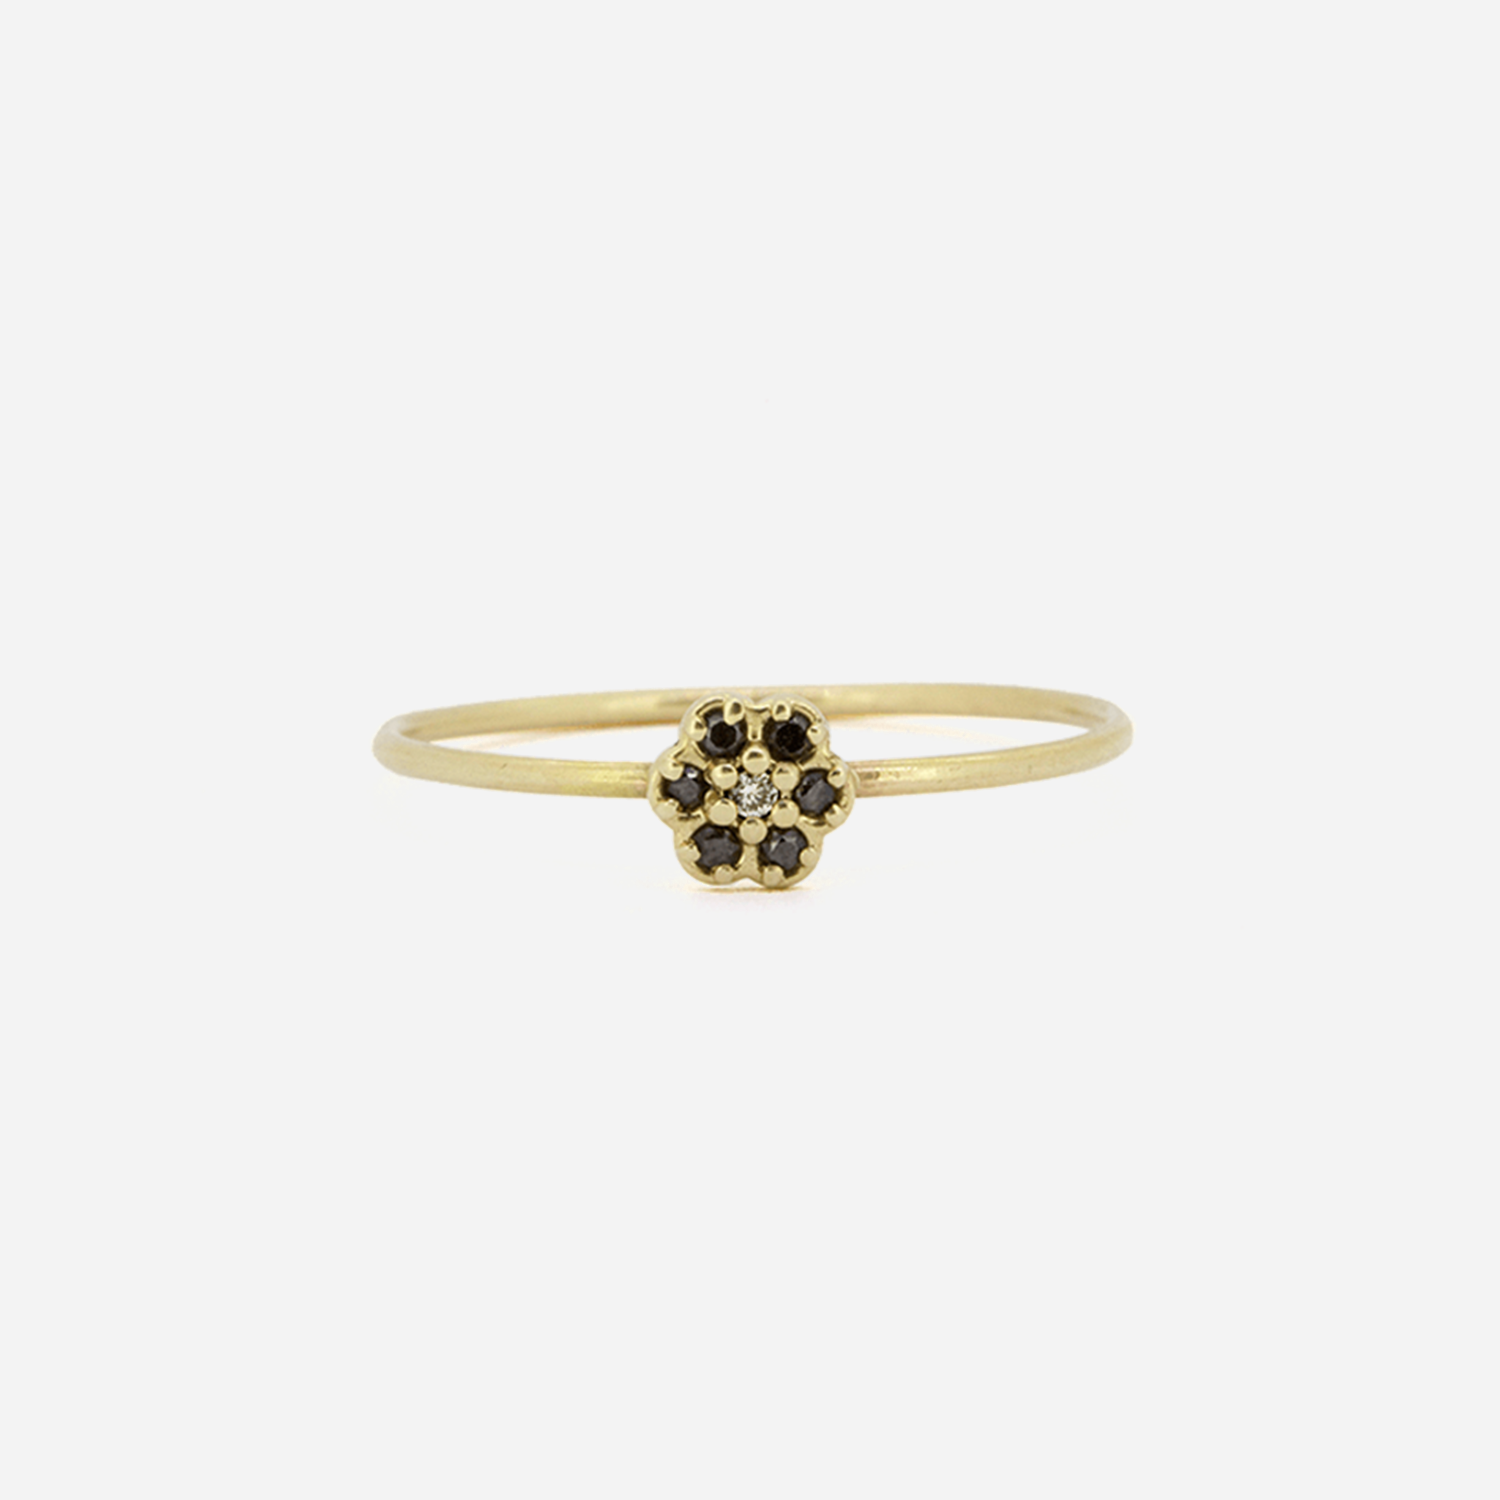 Flower Cluster / Black Diamond Ring By fitzgerald jewelry in rings Category